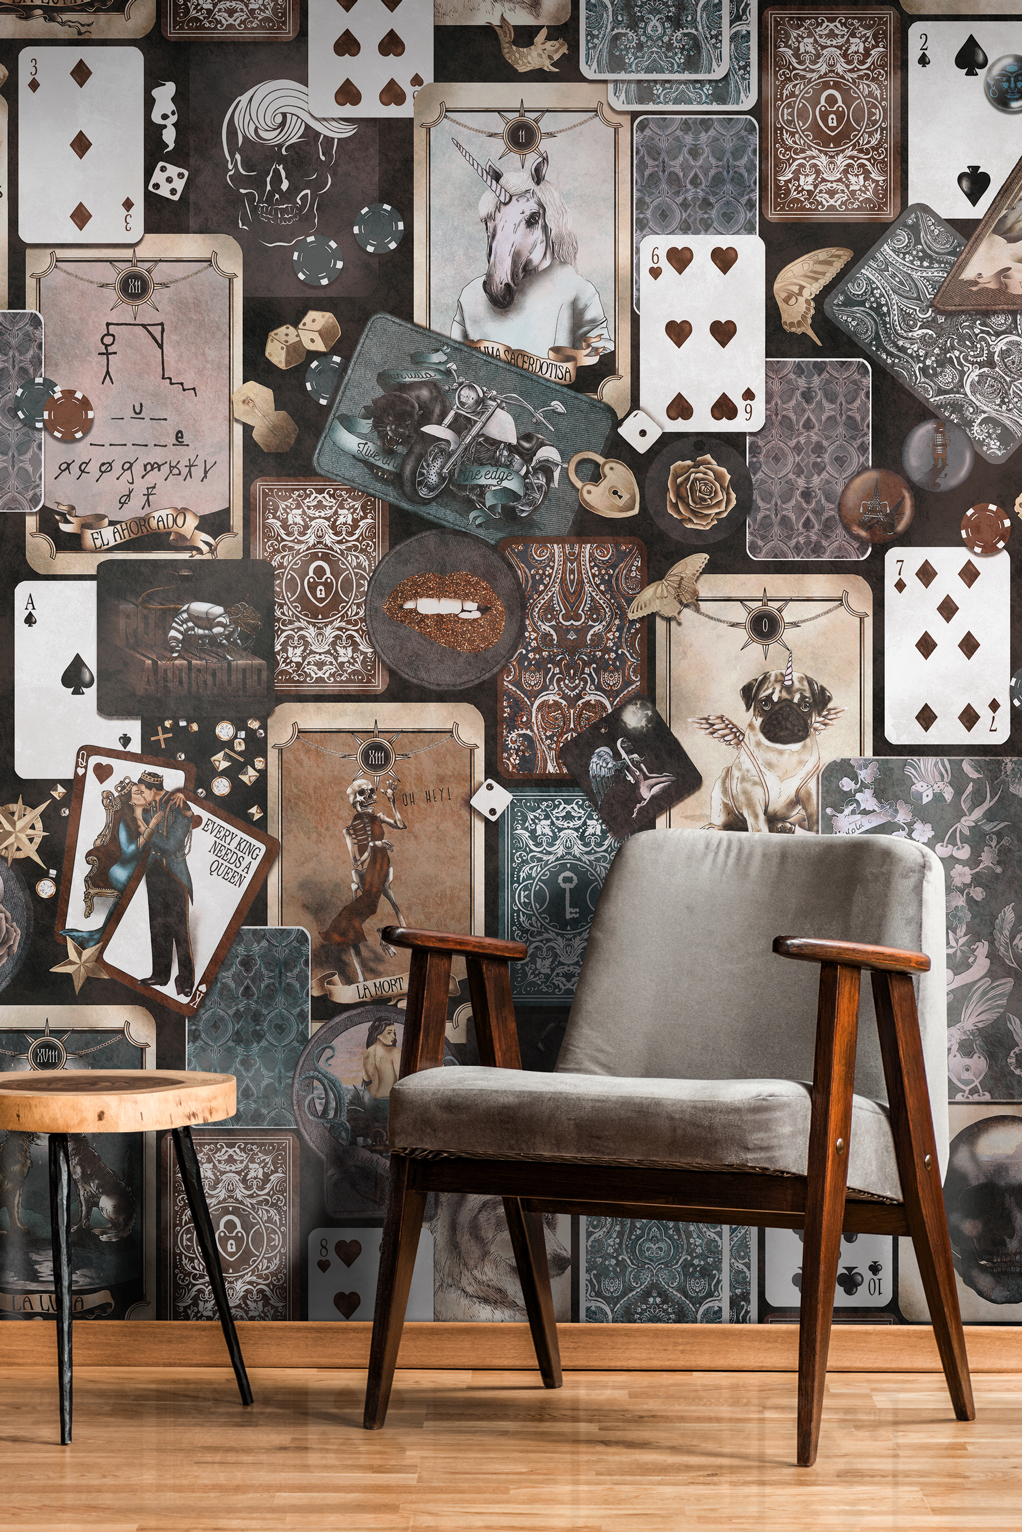 Quirky Industrial interior wallpaper in a vintage colourway -